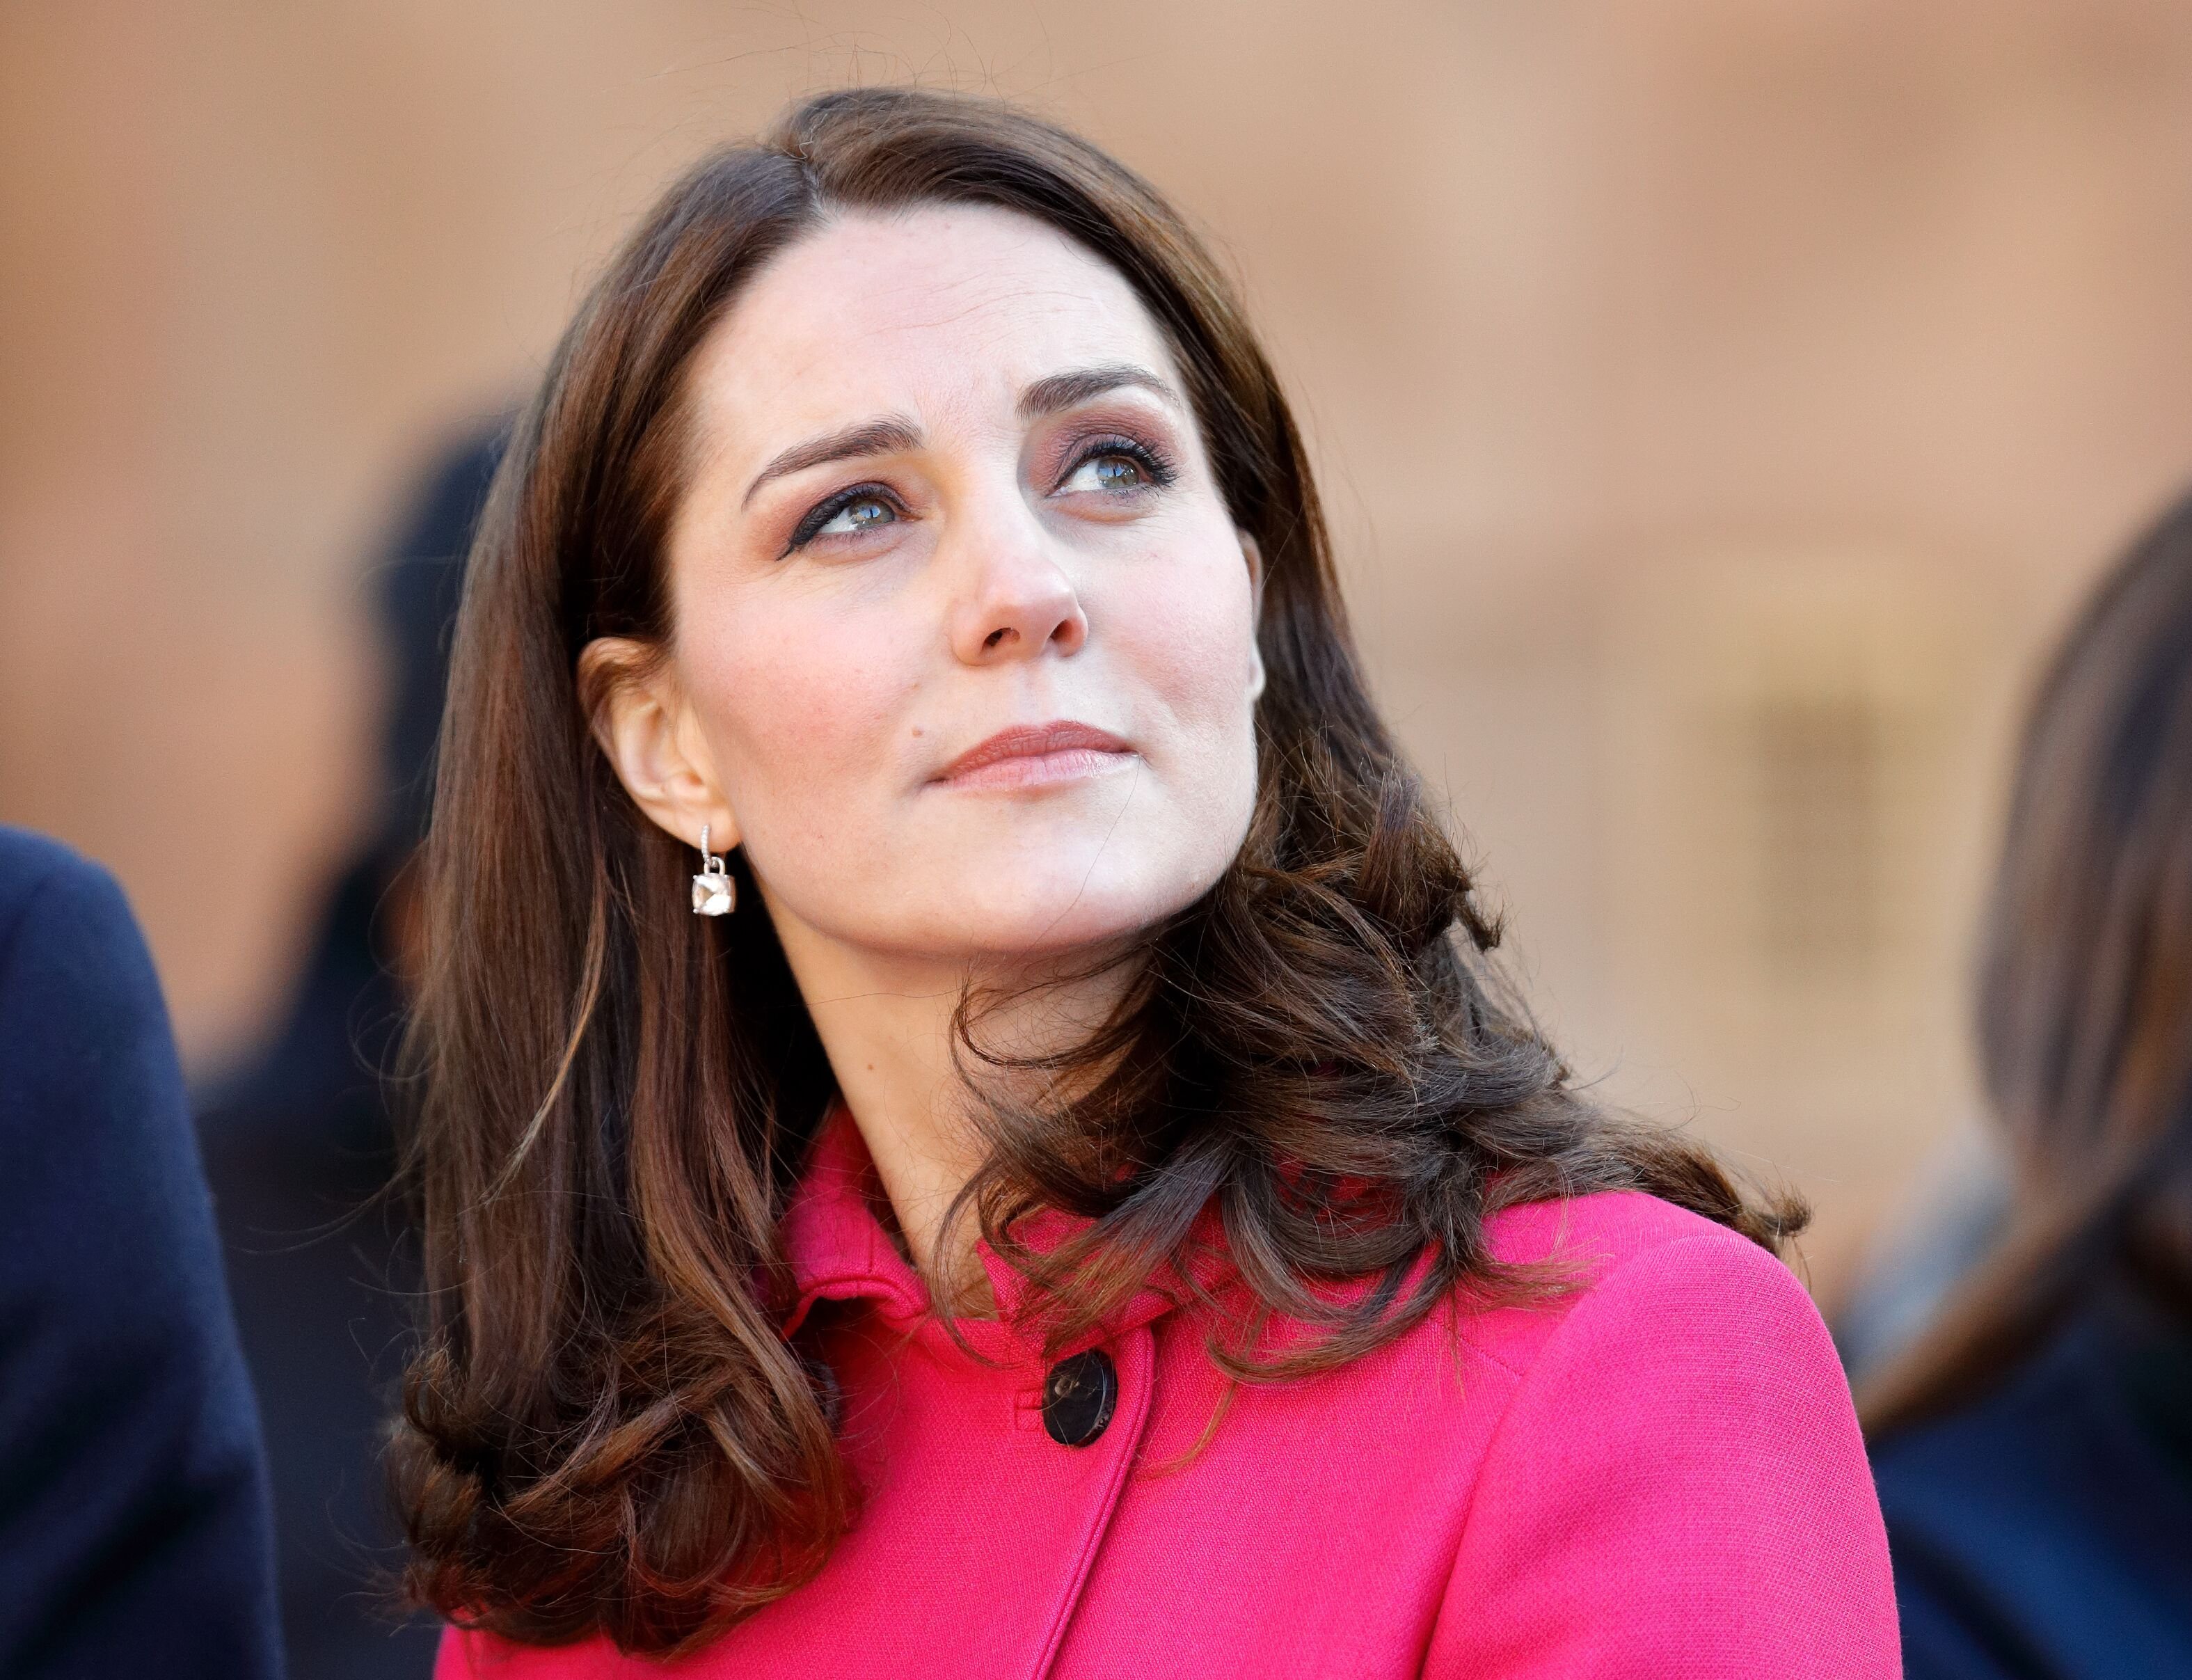 Catherine, Duchess of Cambridge visits Coventry Cathedral on January 16, 2018 in Coventry, England | Photo: Max Mumby/Indigo/Getty Images)